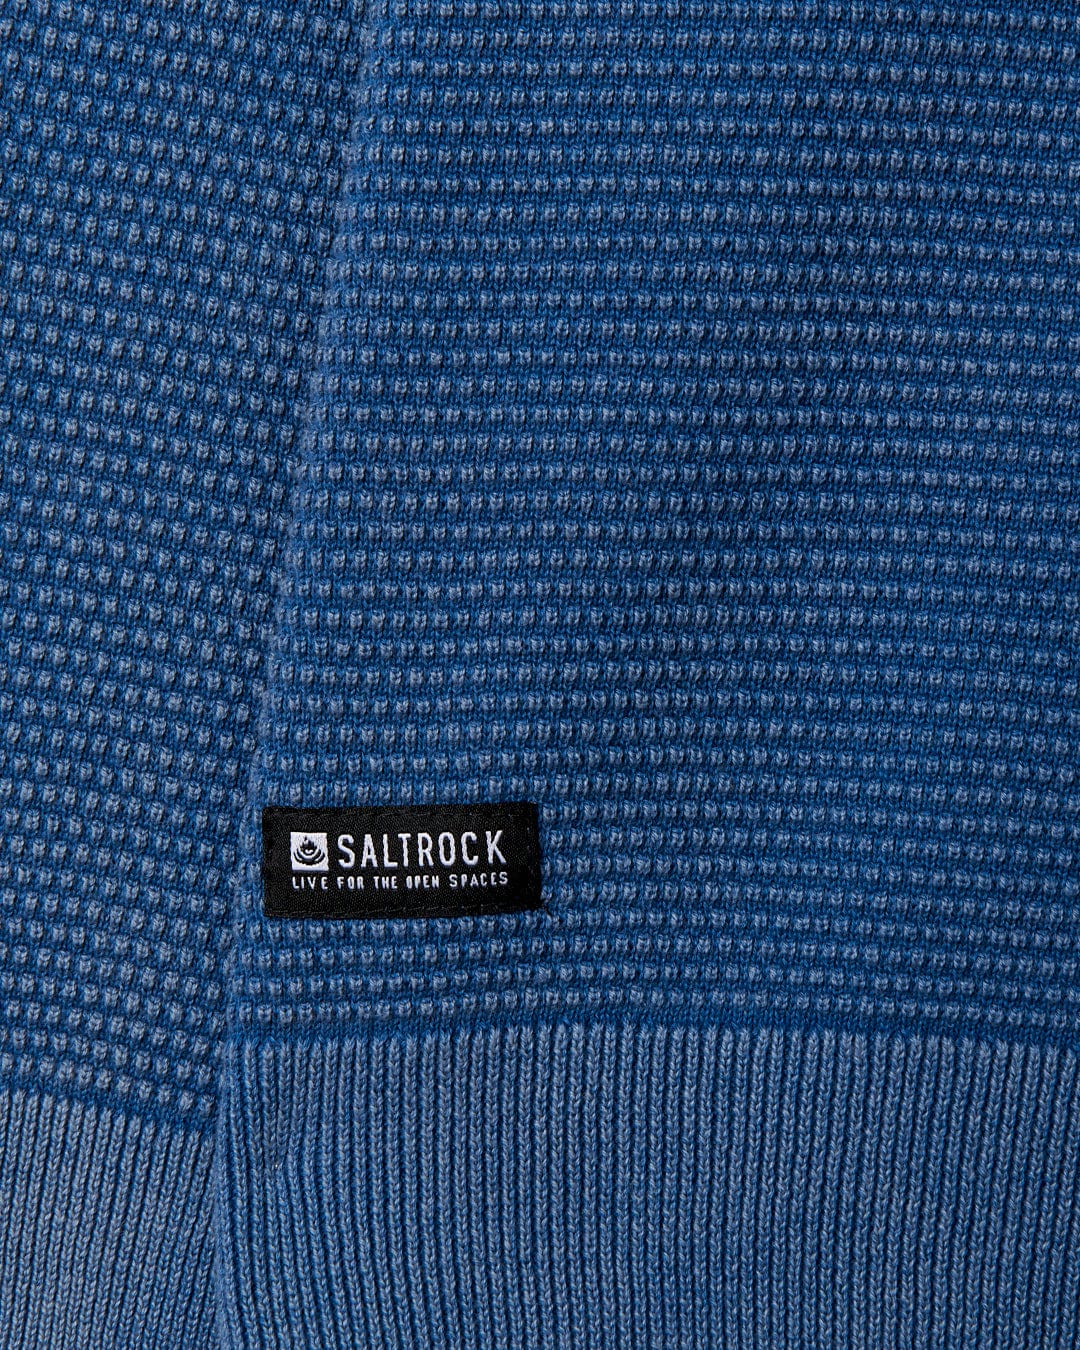 A close up of a Saltrock Moss - Mens Washed Knitted Crew - Blue sweater with a logo on it.